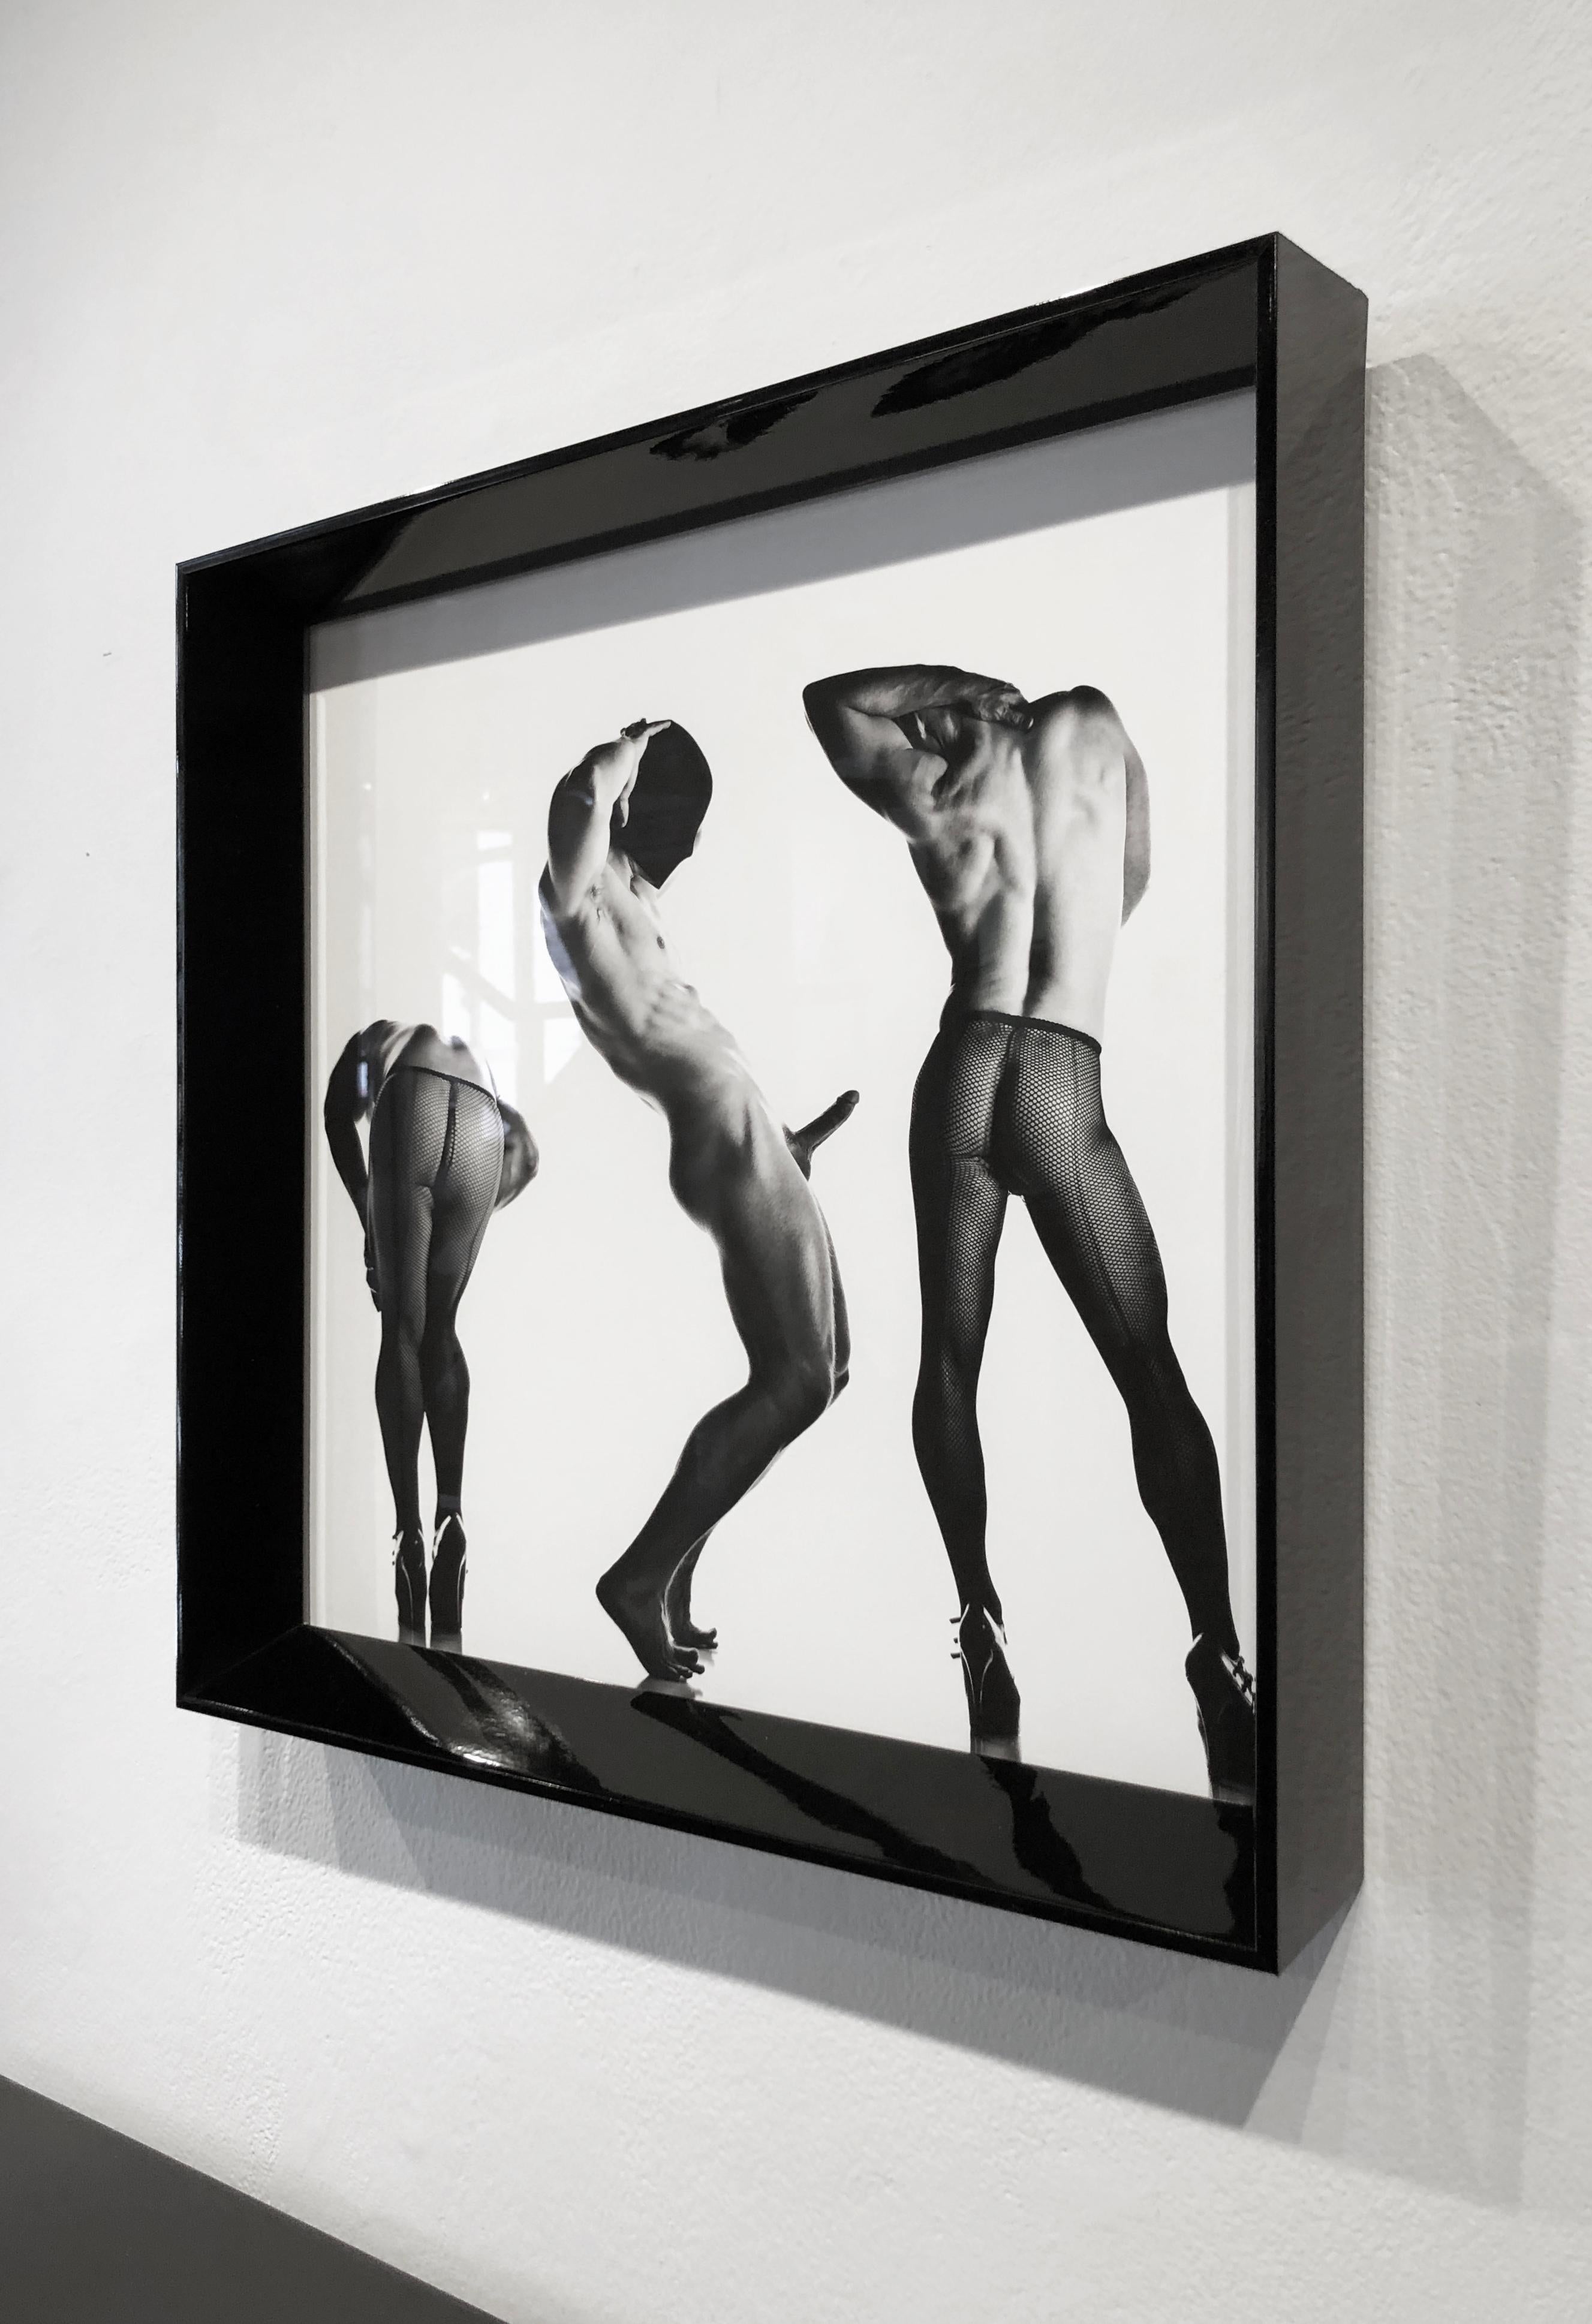 Sex 3 - Erotic Male Photo, Fishnet Stockings and High Heals, Matted and Framed - Black Black and White Photograph by Doug Birkenheuer